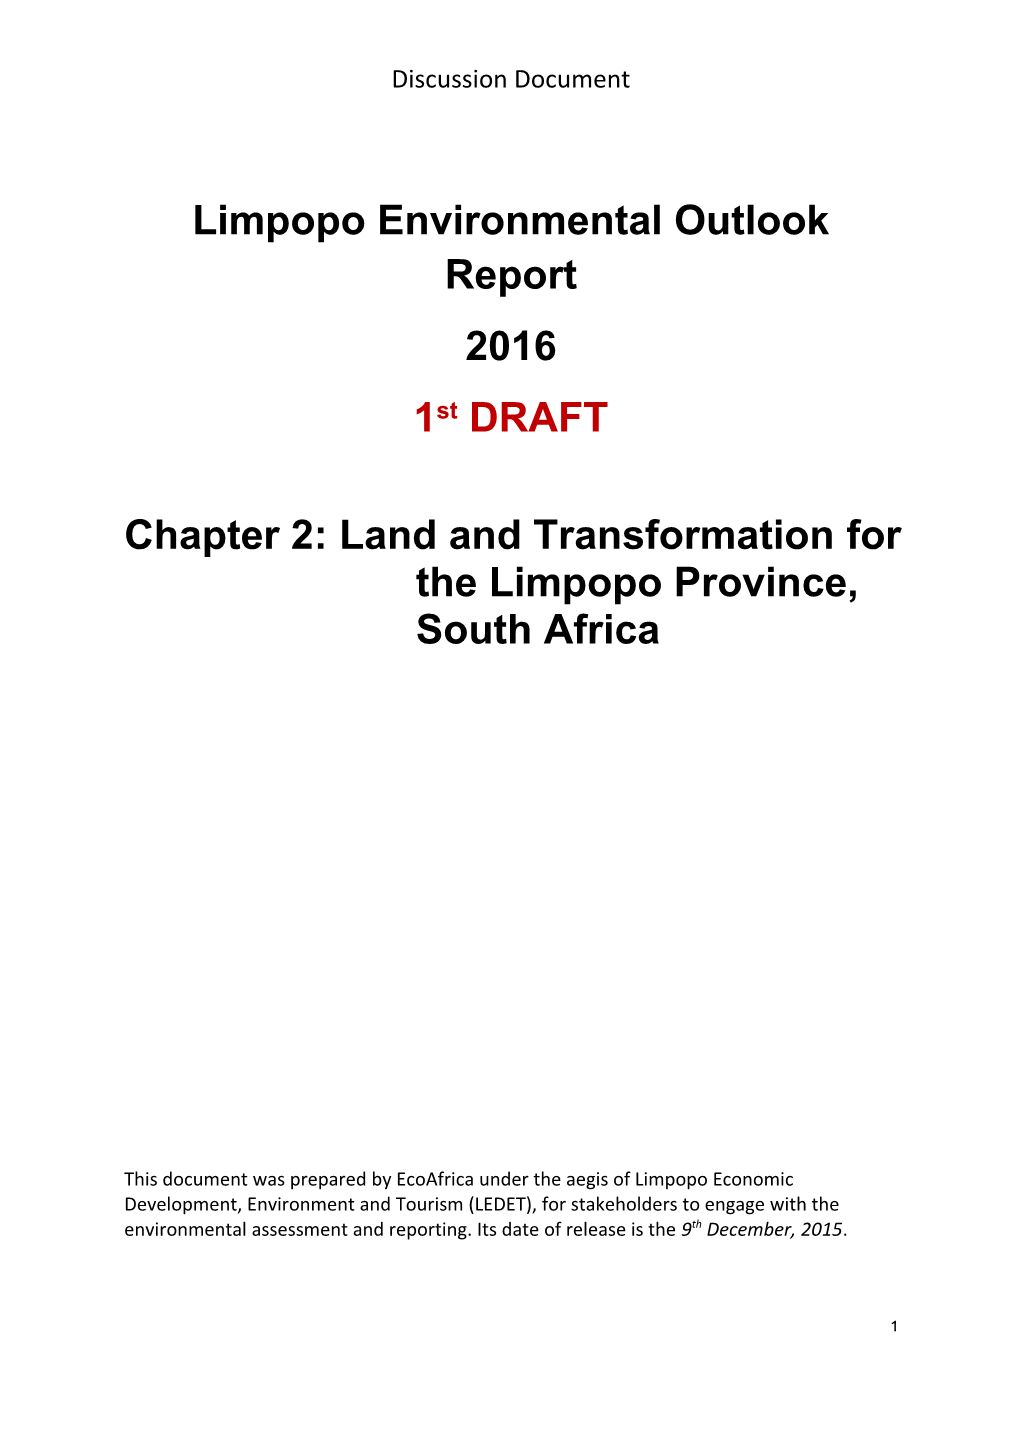 Limpopo Environmental Outlook Report